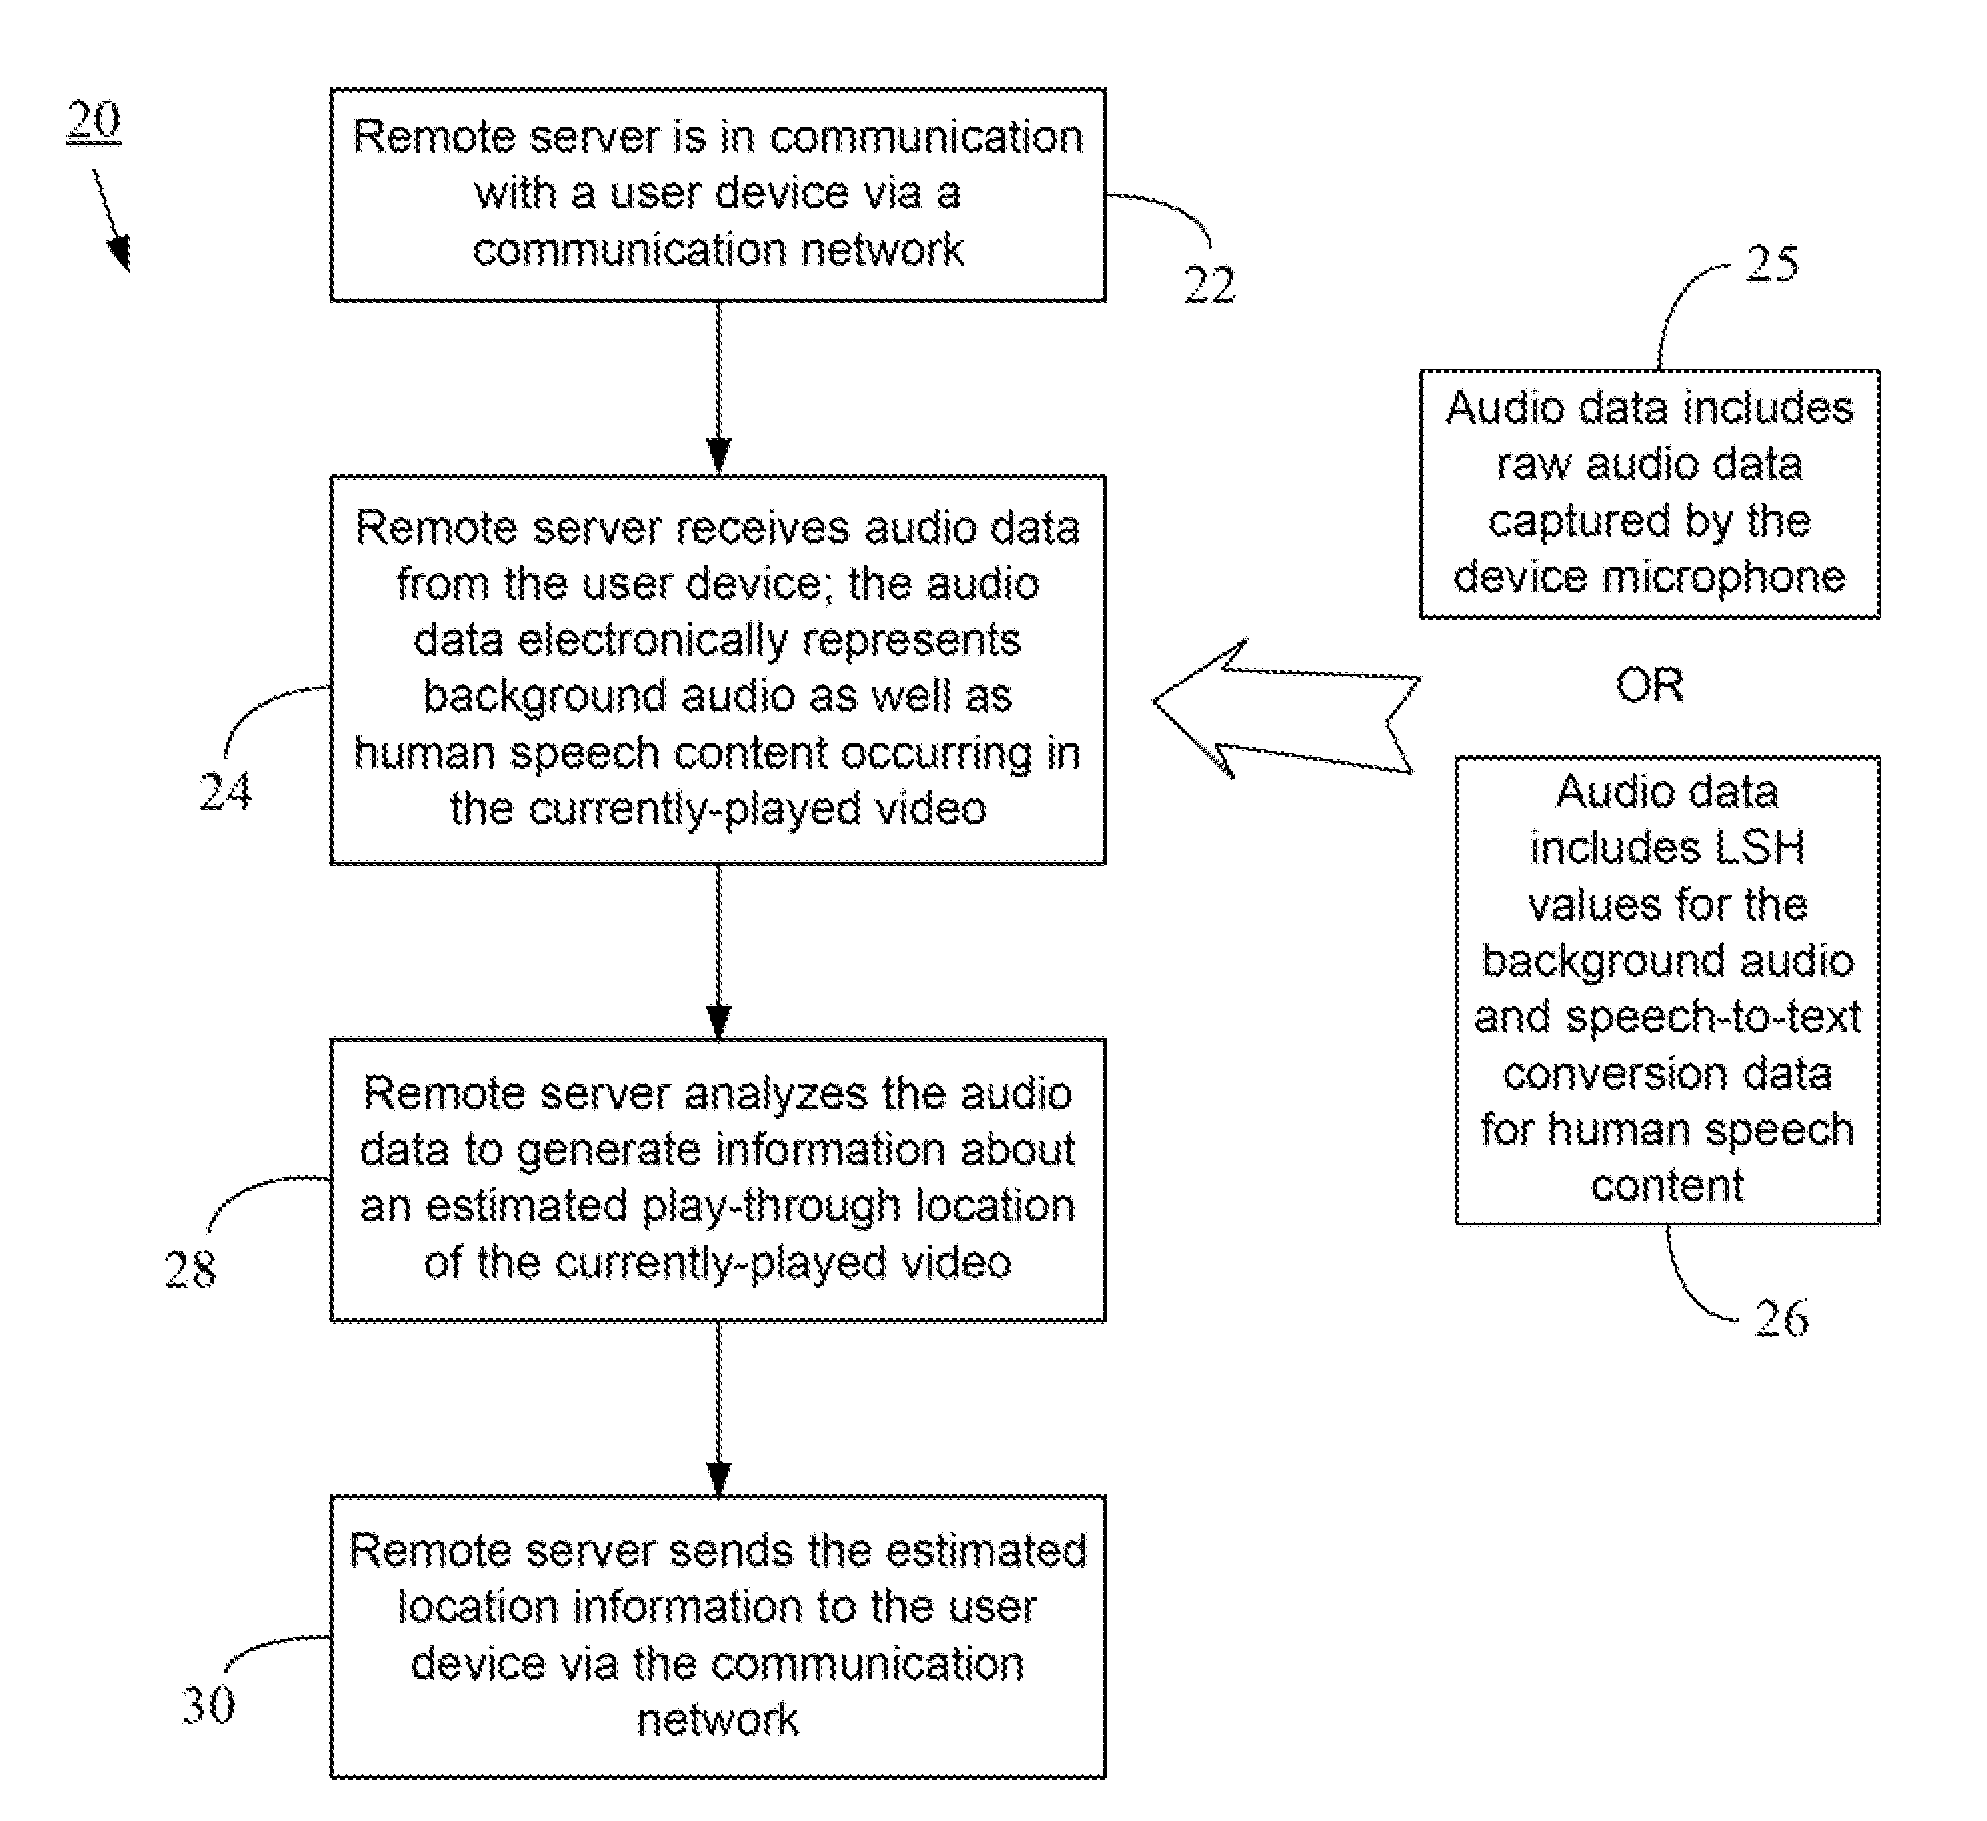 Hybrid video recognition system based on audio and subtitle data